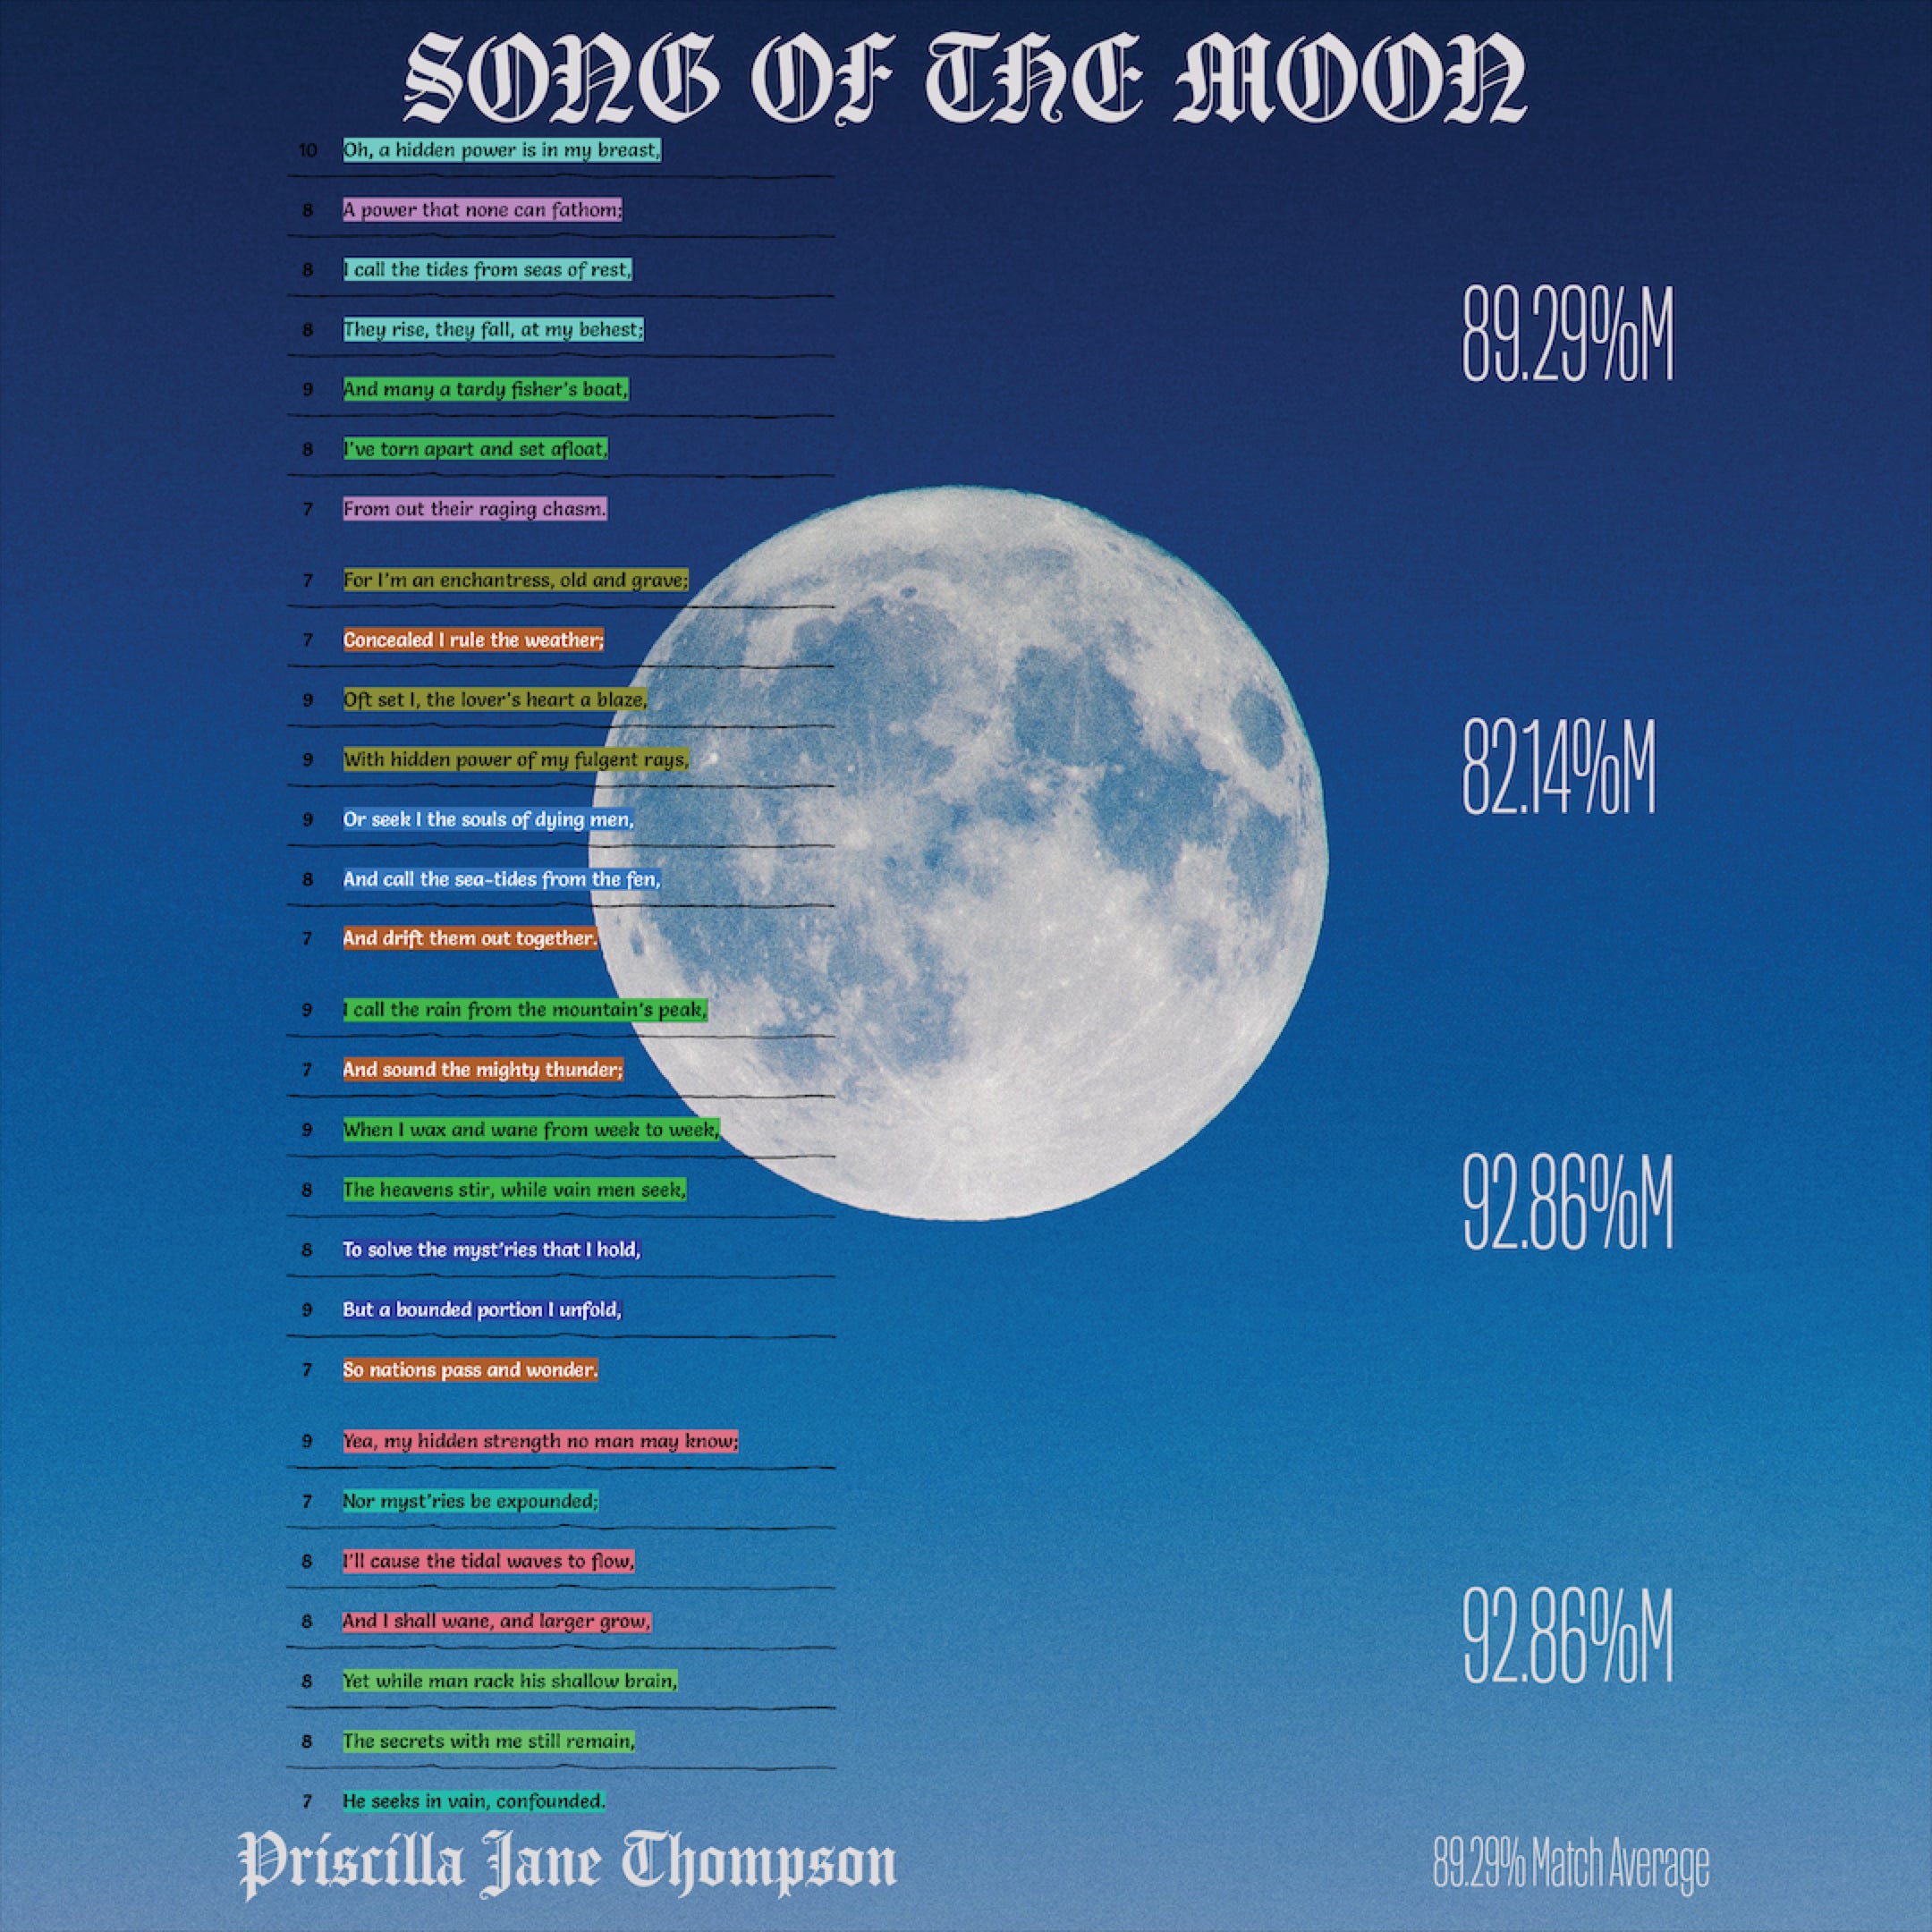 SONG OF THE MOON by Priscilla Jane Thompson - Poet Tree Poetry